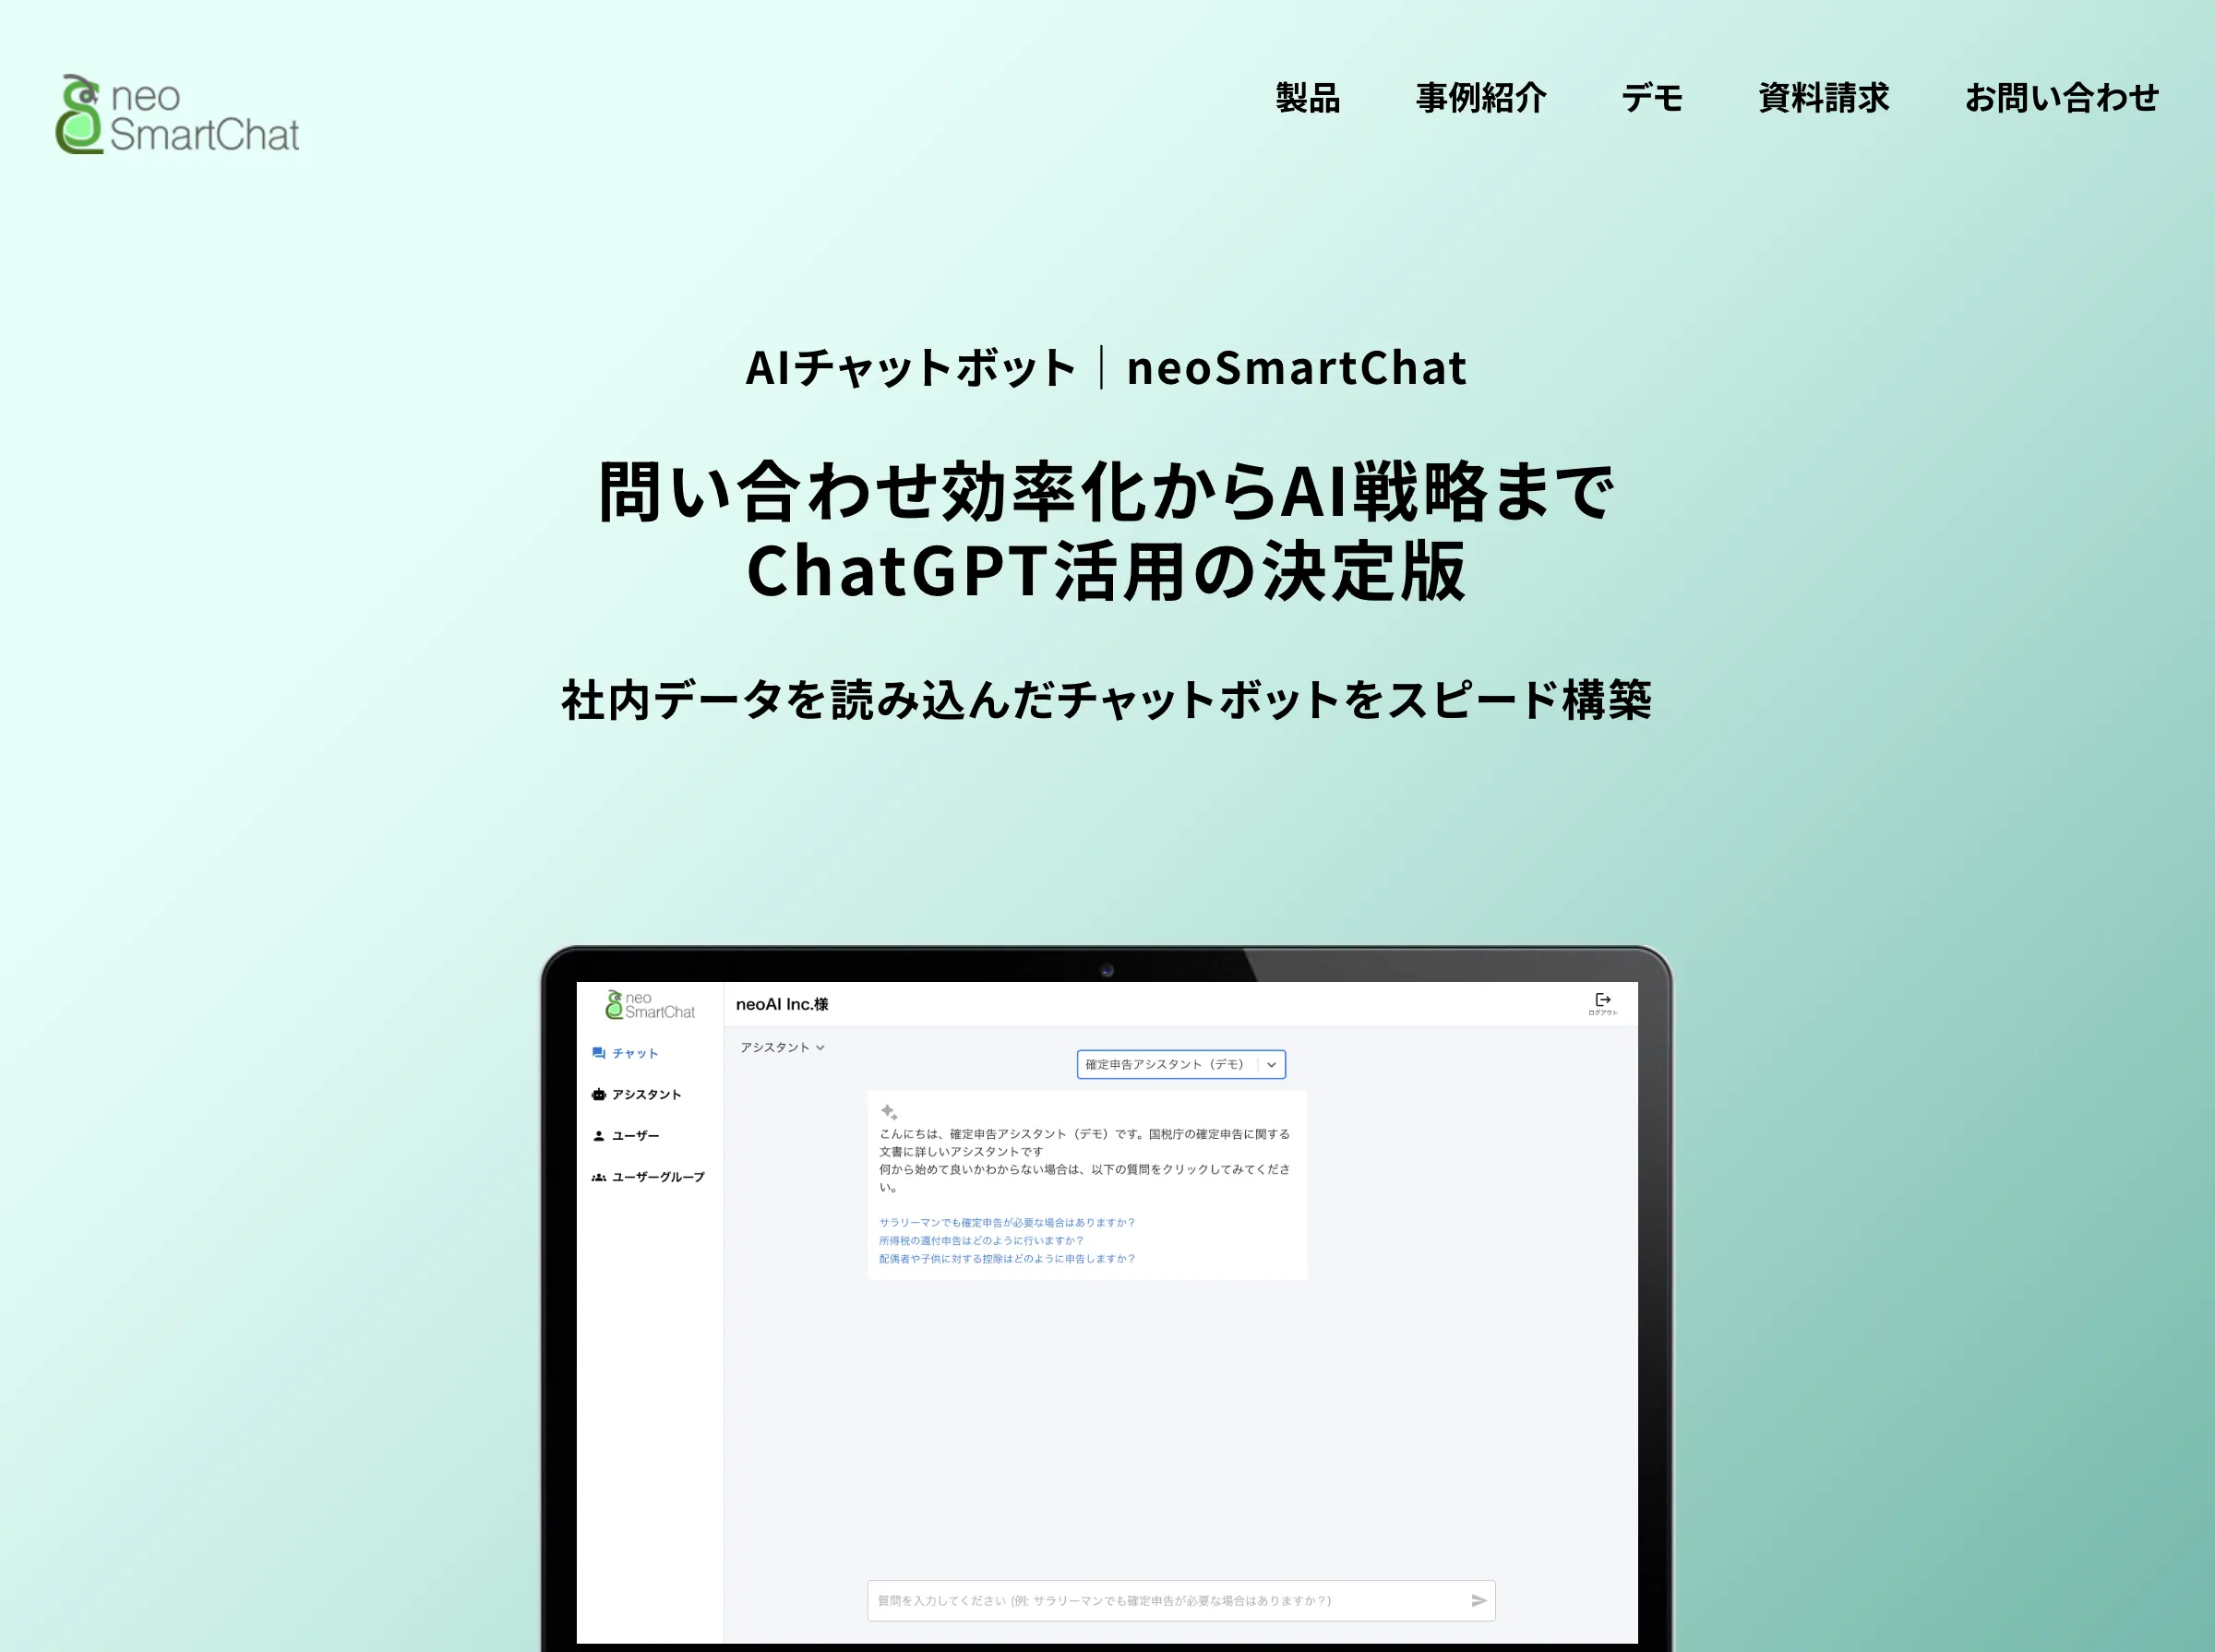 neo SmarChatの紹介画像